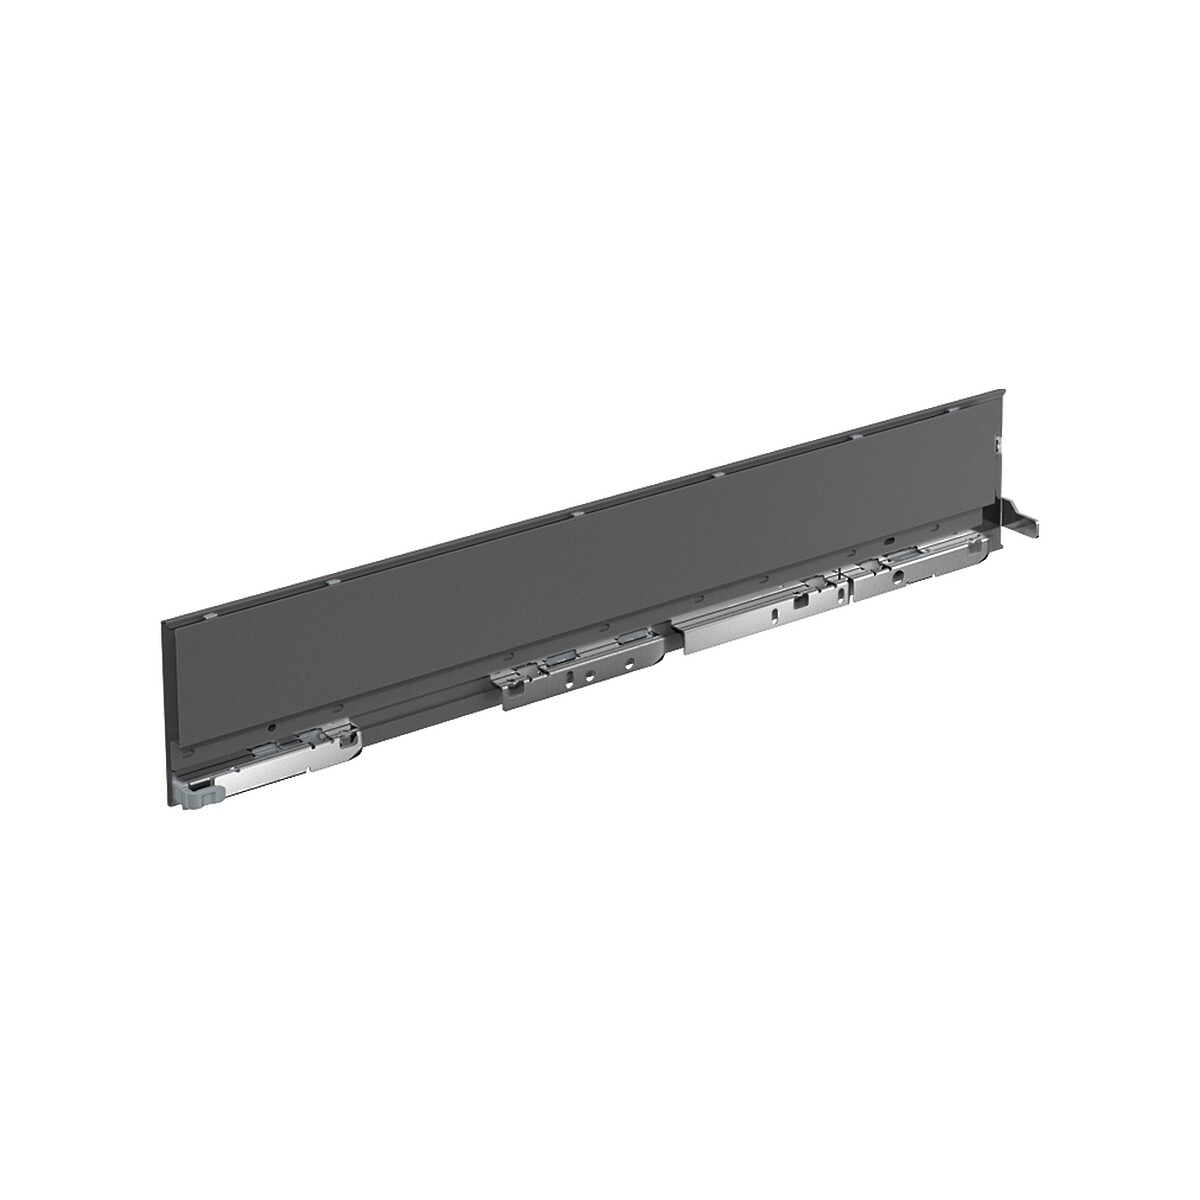 AvanTech YOU Drawer side profile, height 101 mm x NL 300 mm, Anthracite, Left